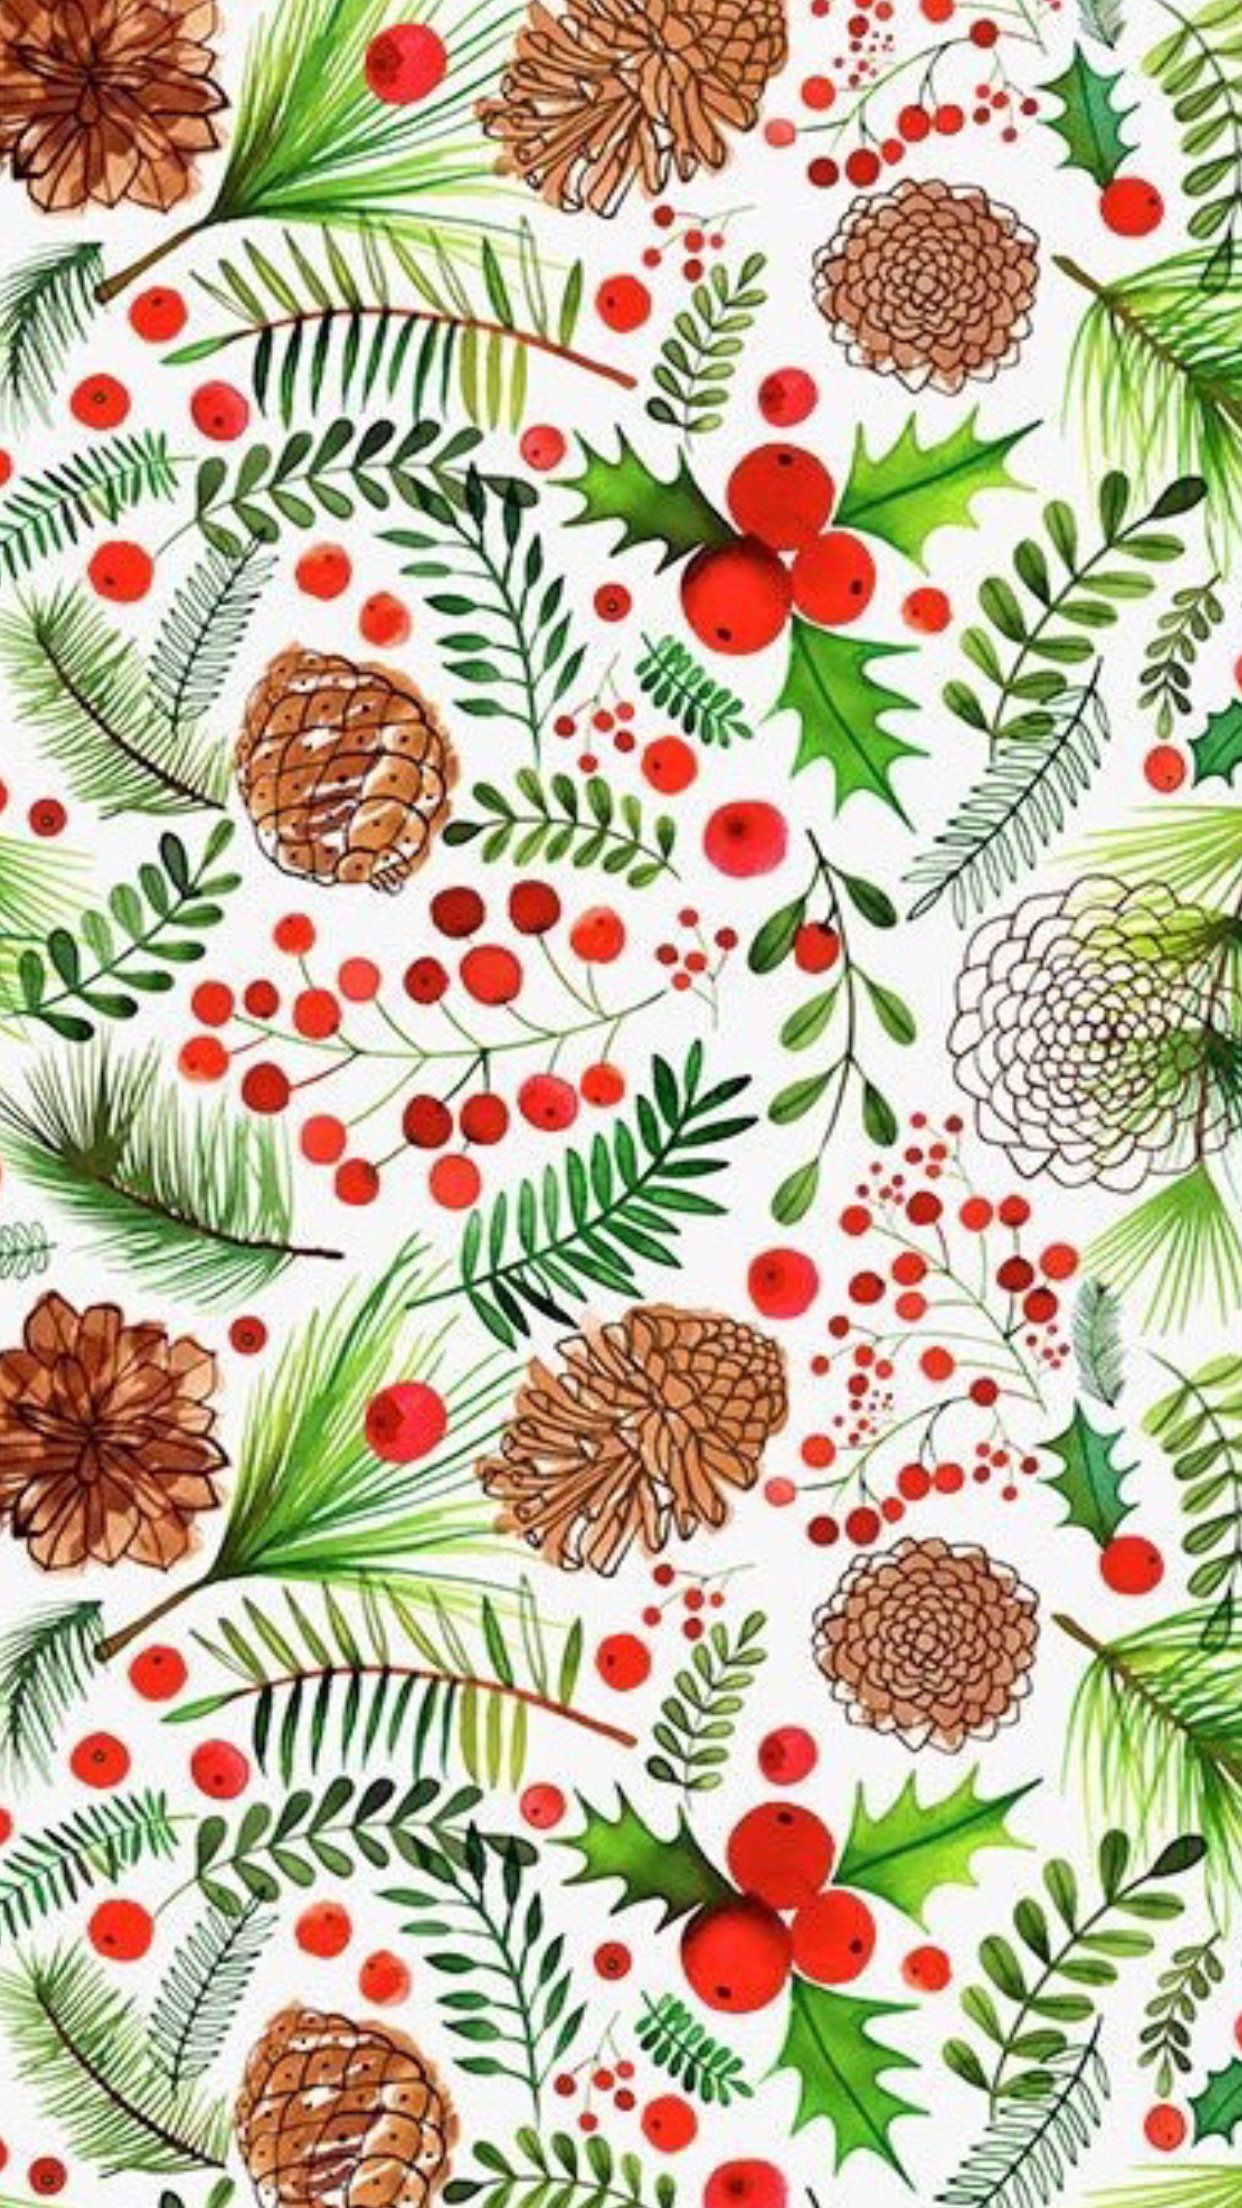 New year Christmas holidays Wallpaper. Floral wallpaper iphone, Holiday wallpaper, Christmas wallpaper